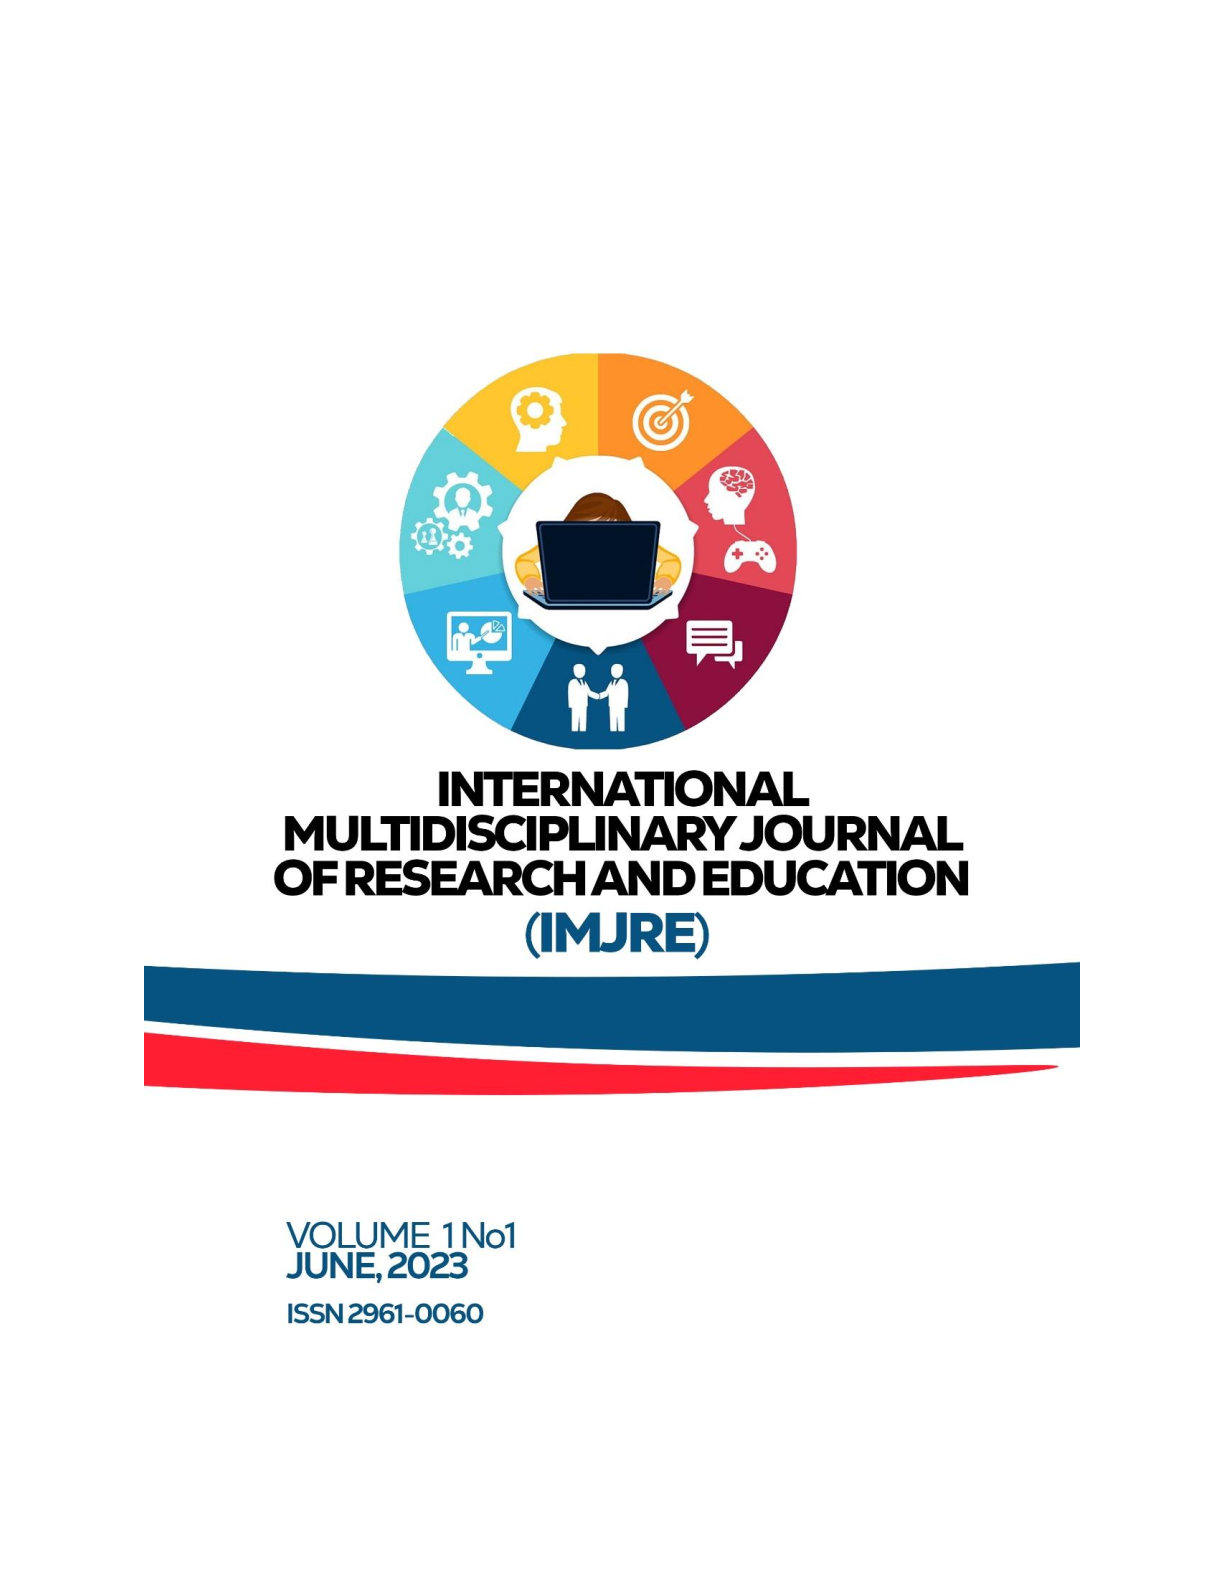 					View Vol. 1 No. 1 (2023): INTERNATIONAL MULTIDISCIPLINARY JOURNAL OF RESEARCH AND EDUCATION (IMJRE)
				